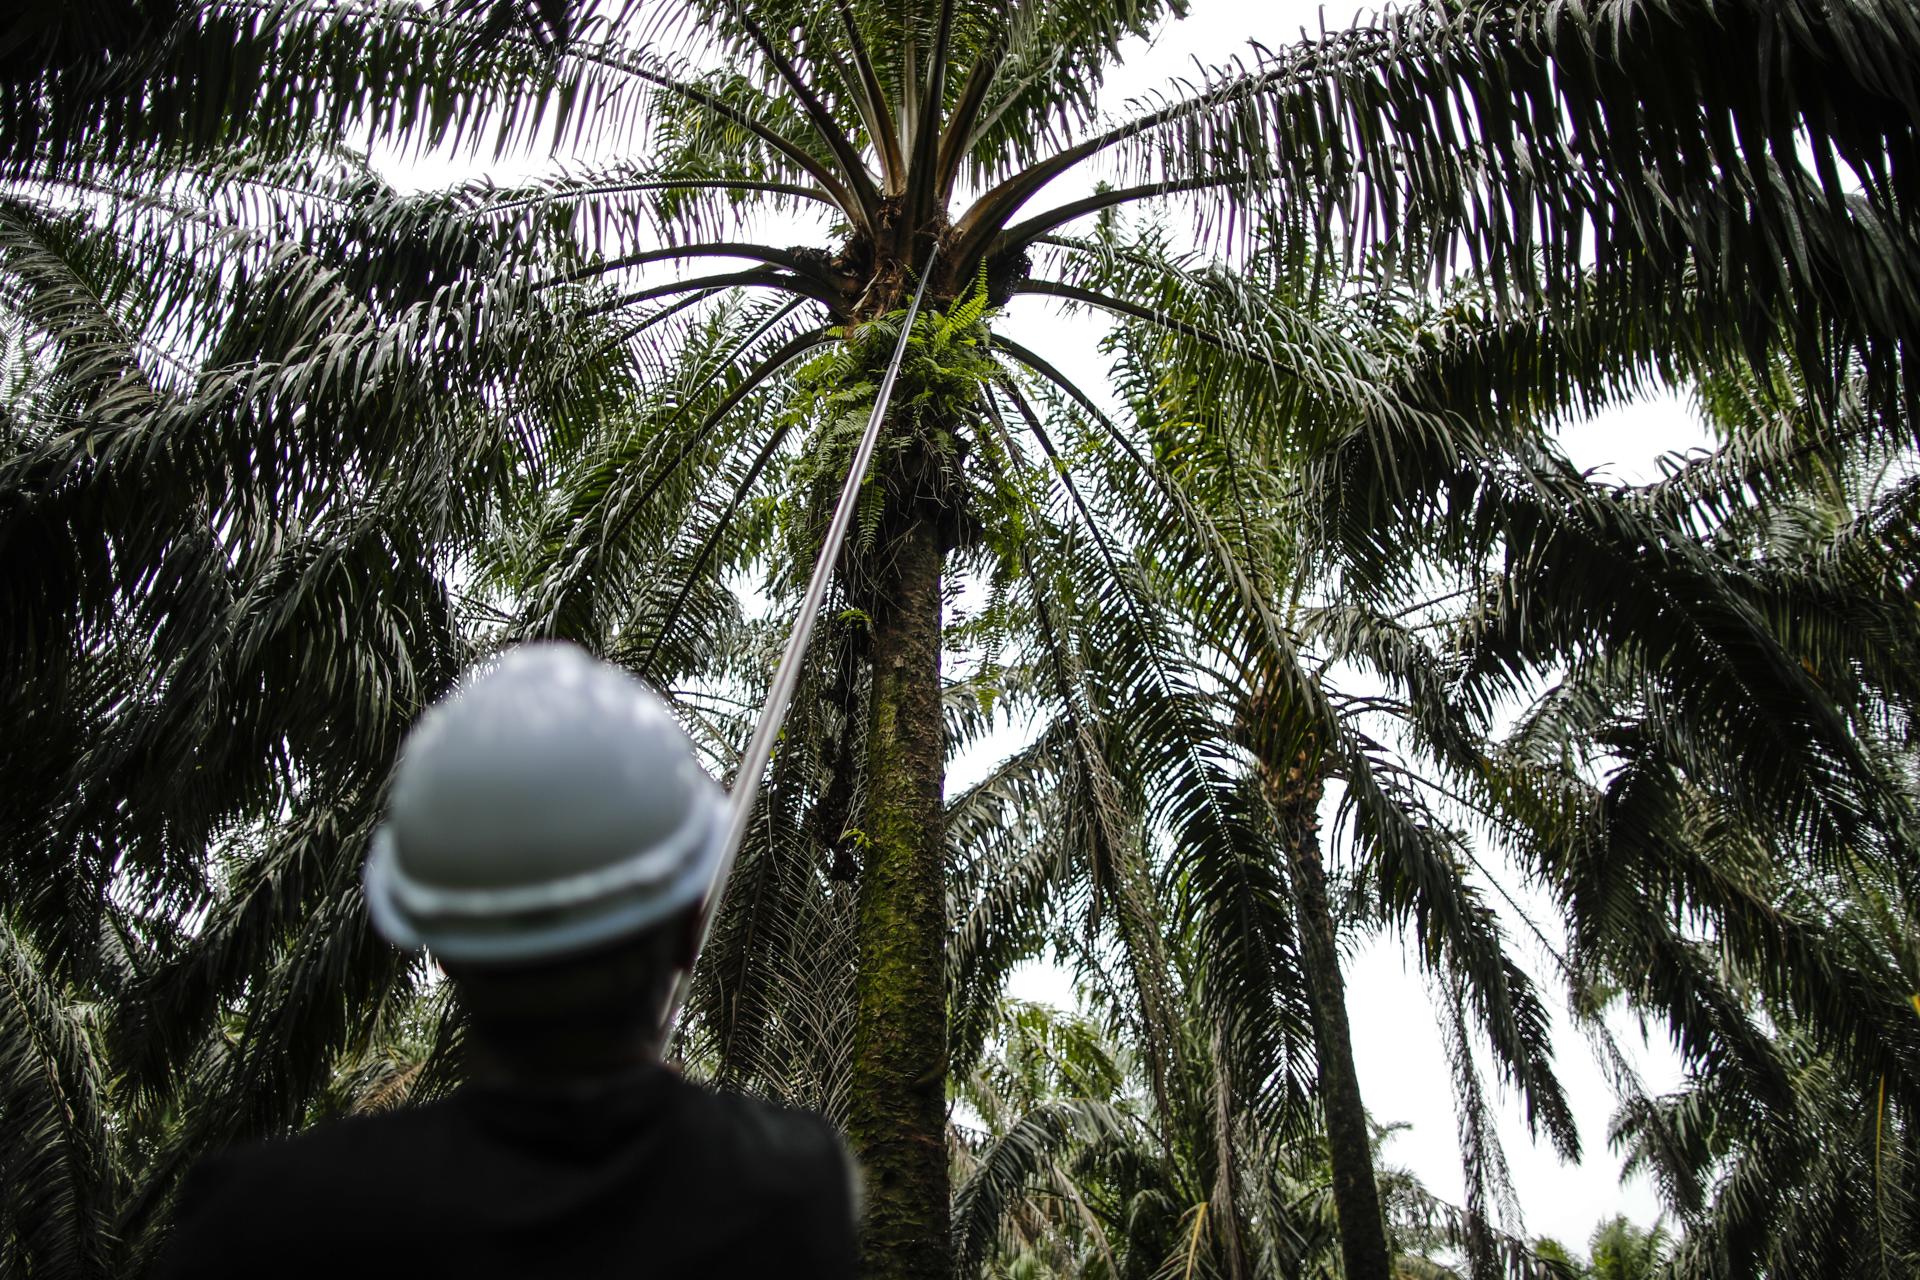 A worker collects palm fruits at a palm oil plantation in Sabak Bernam, Selangor, Malaysia, 21 July 2023 (issued 28 July 2023). EFE/EPA/FAZRY ISMAIL ATTENTION: This Image is part of a PHOTO SET
